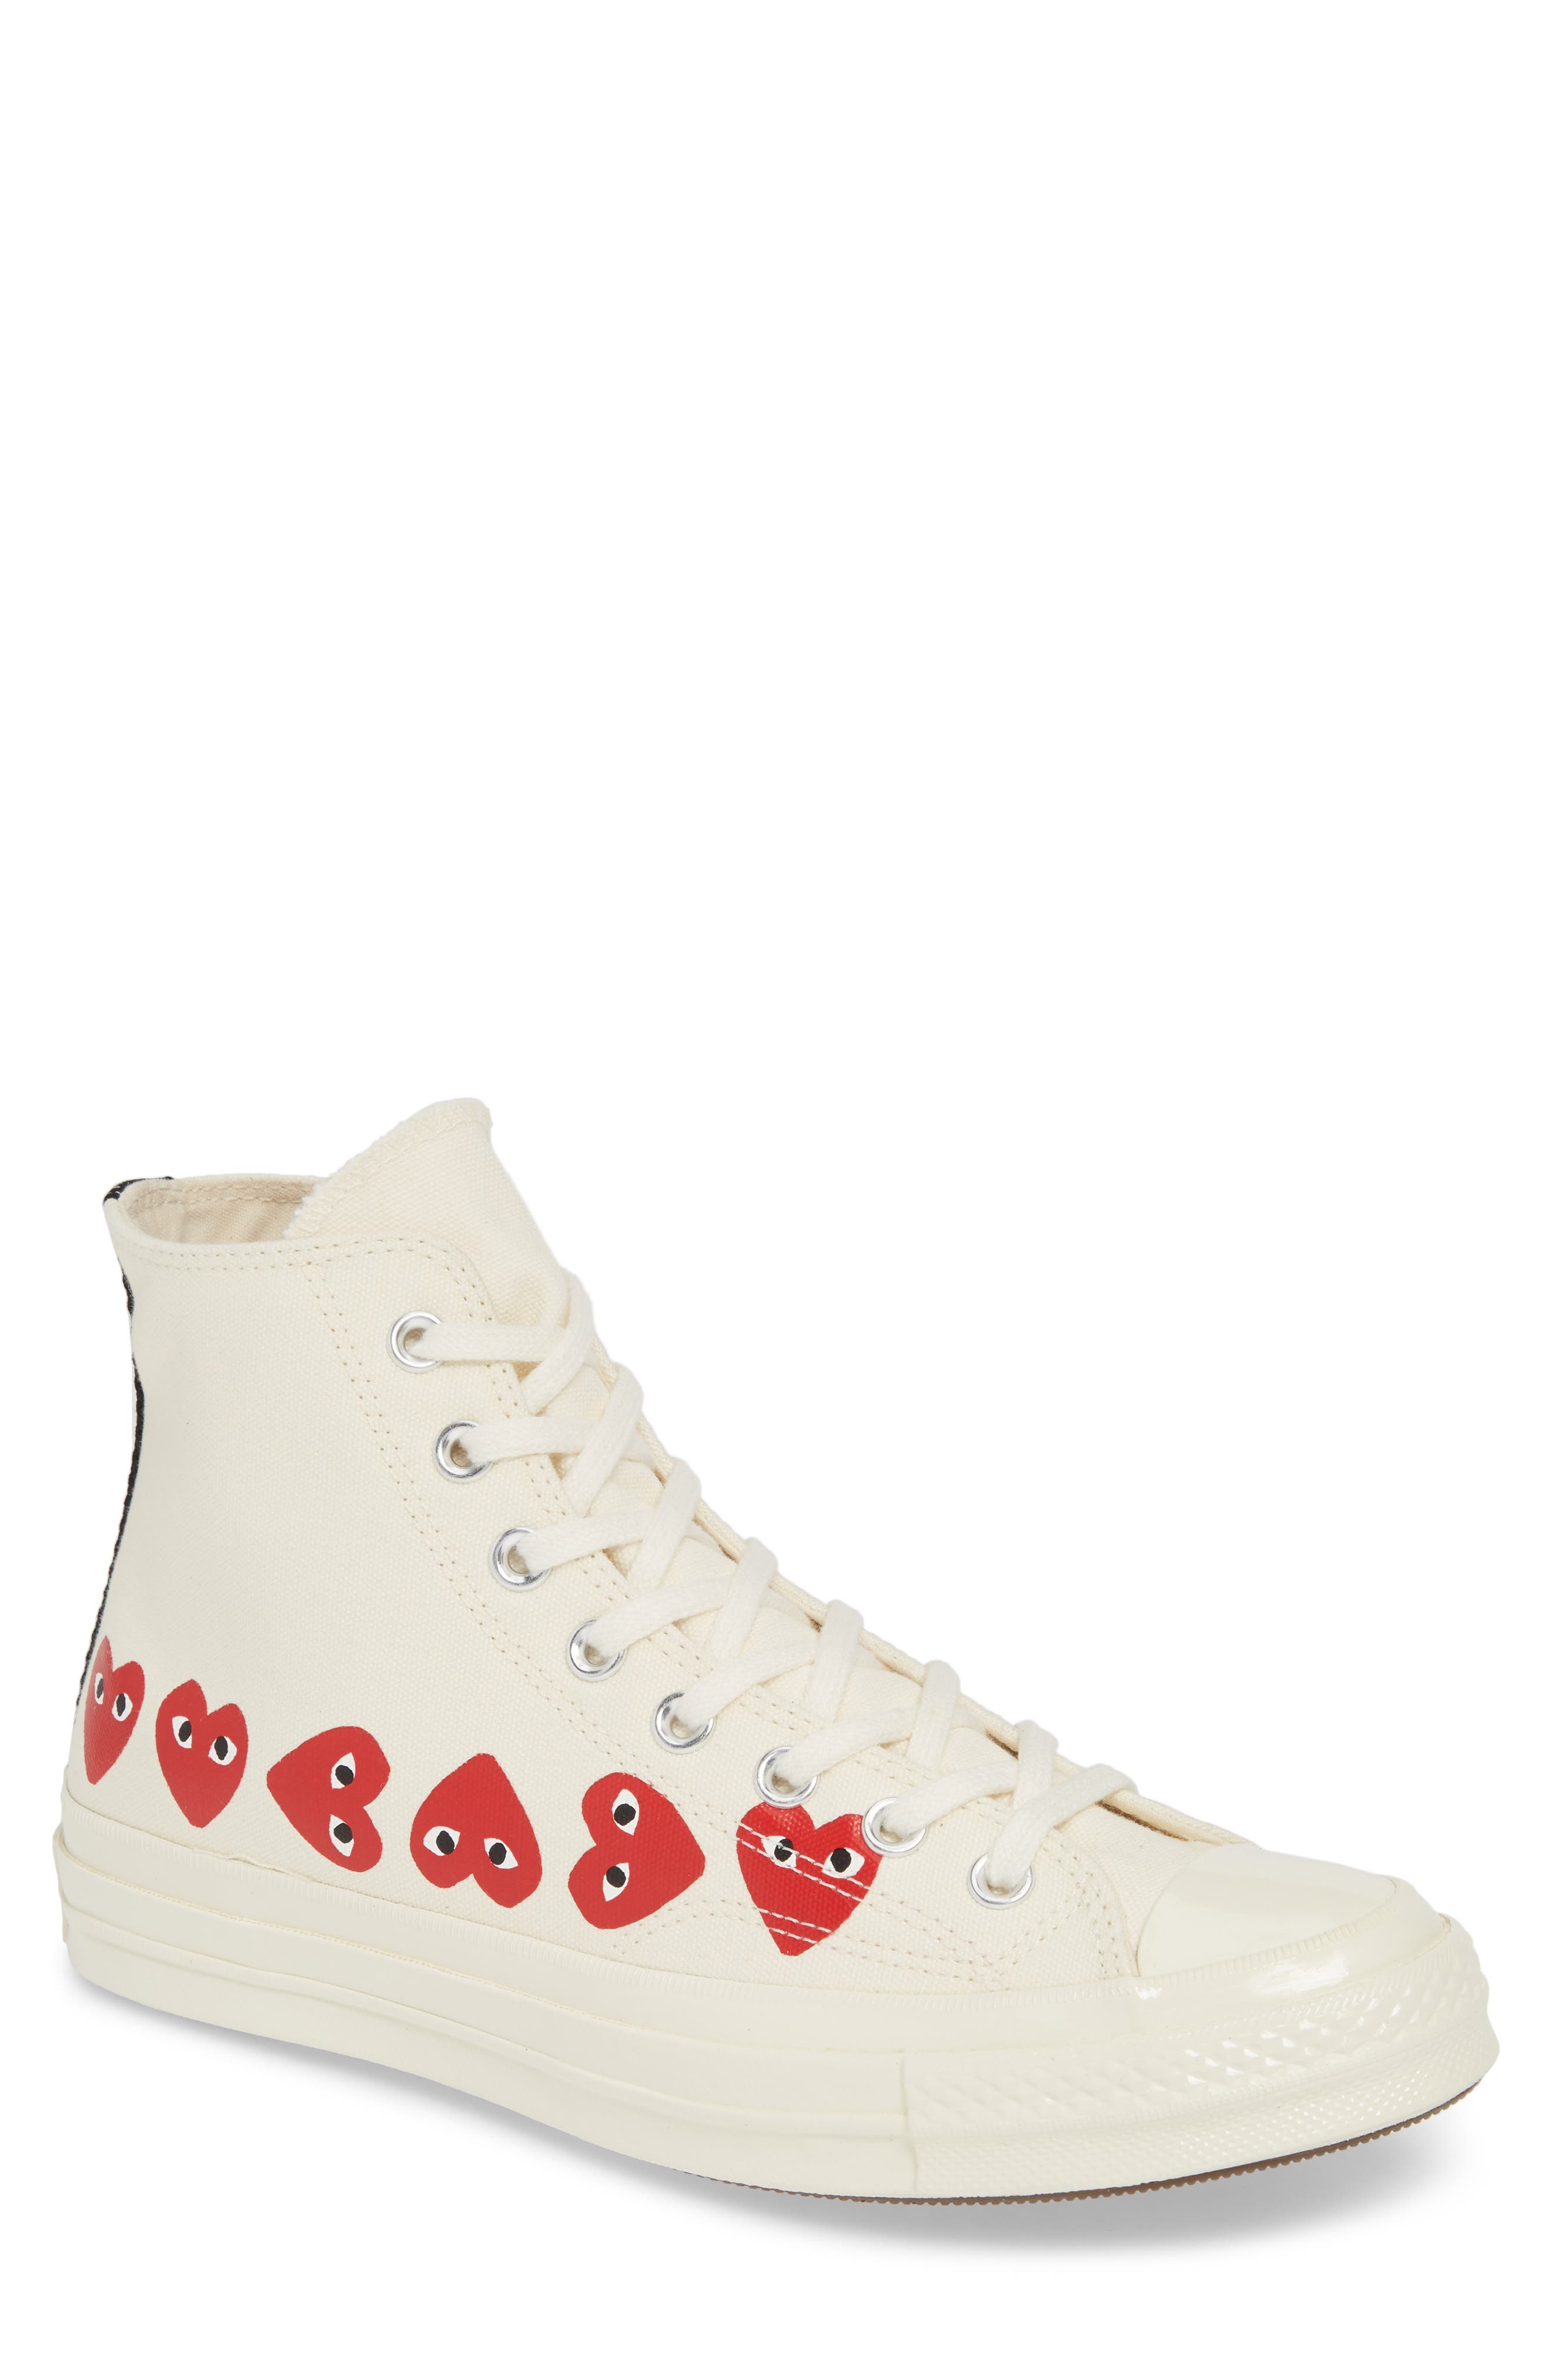 size 13 cdg converse